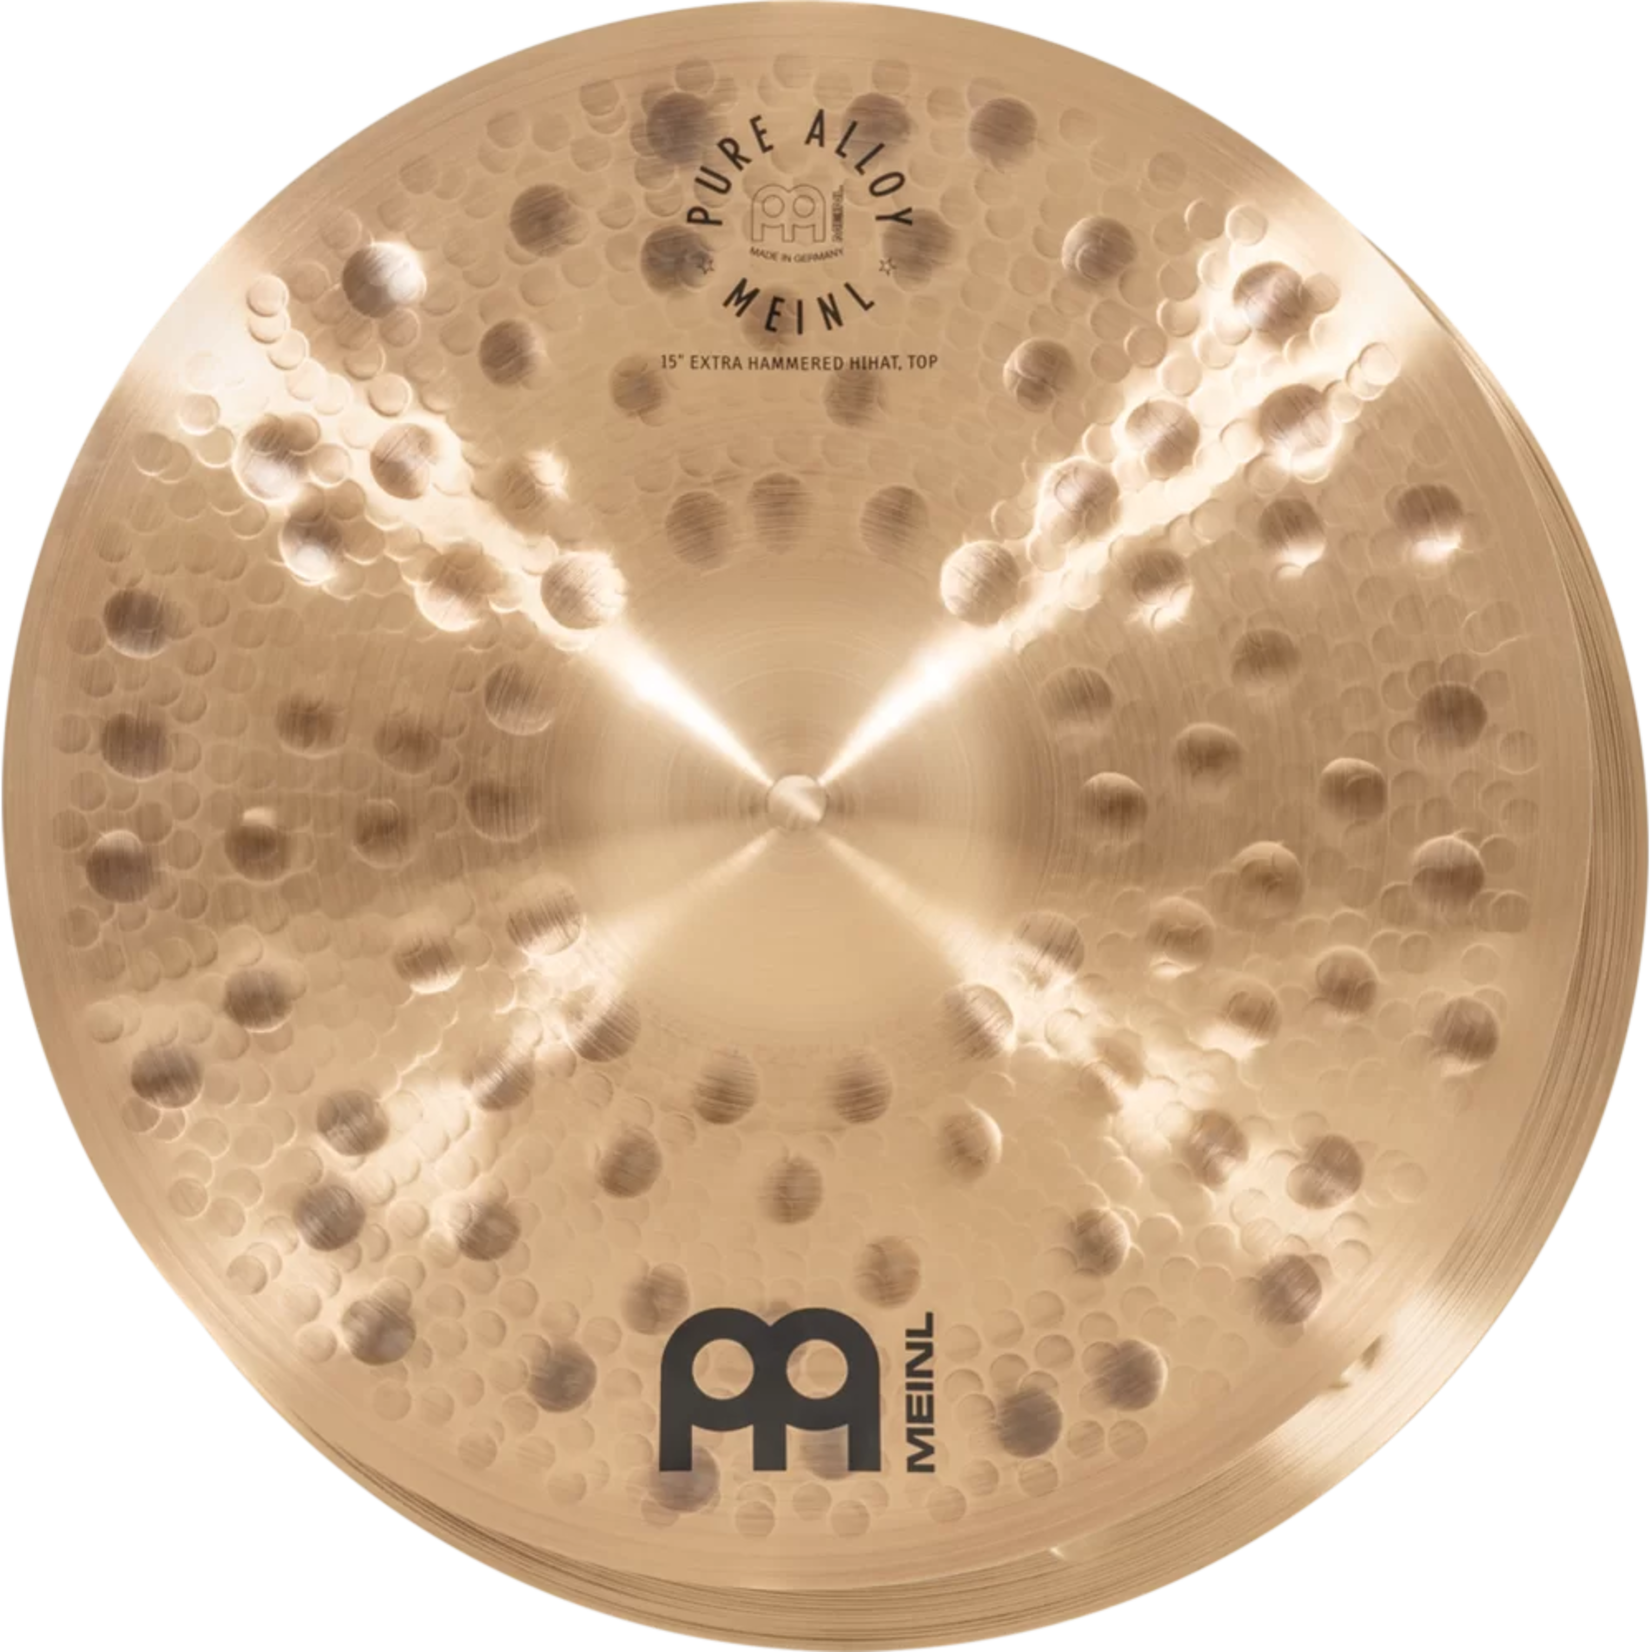 Meinl Meinl Pure Alloy 15" Extra Hammered Hi-Hats PA15EHH